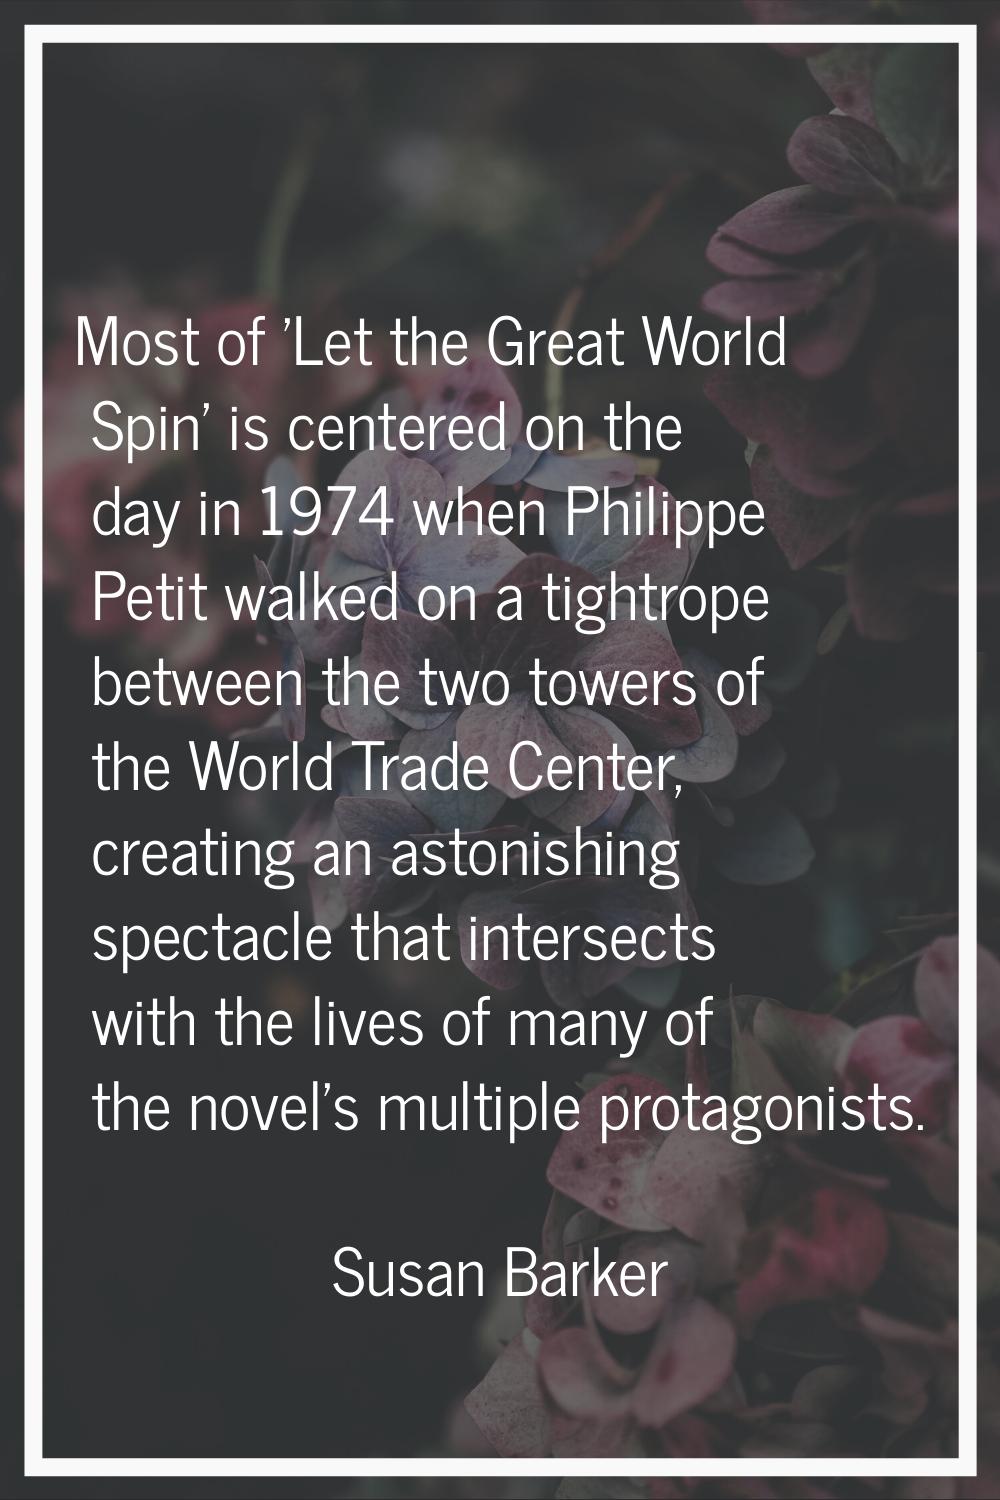 Most of 'Let the Great World Spin' is centered on the day in 1974 when Philippe Petit walked on a t